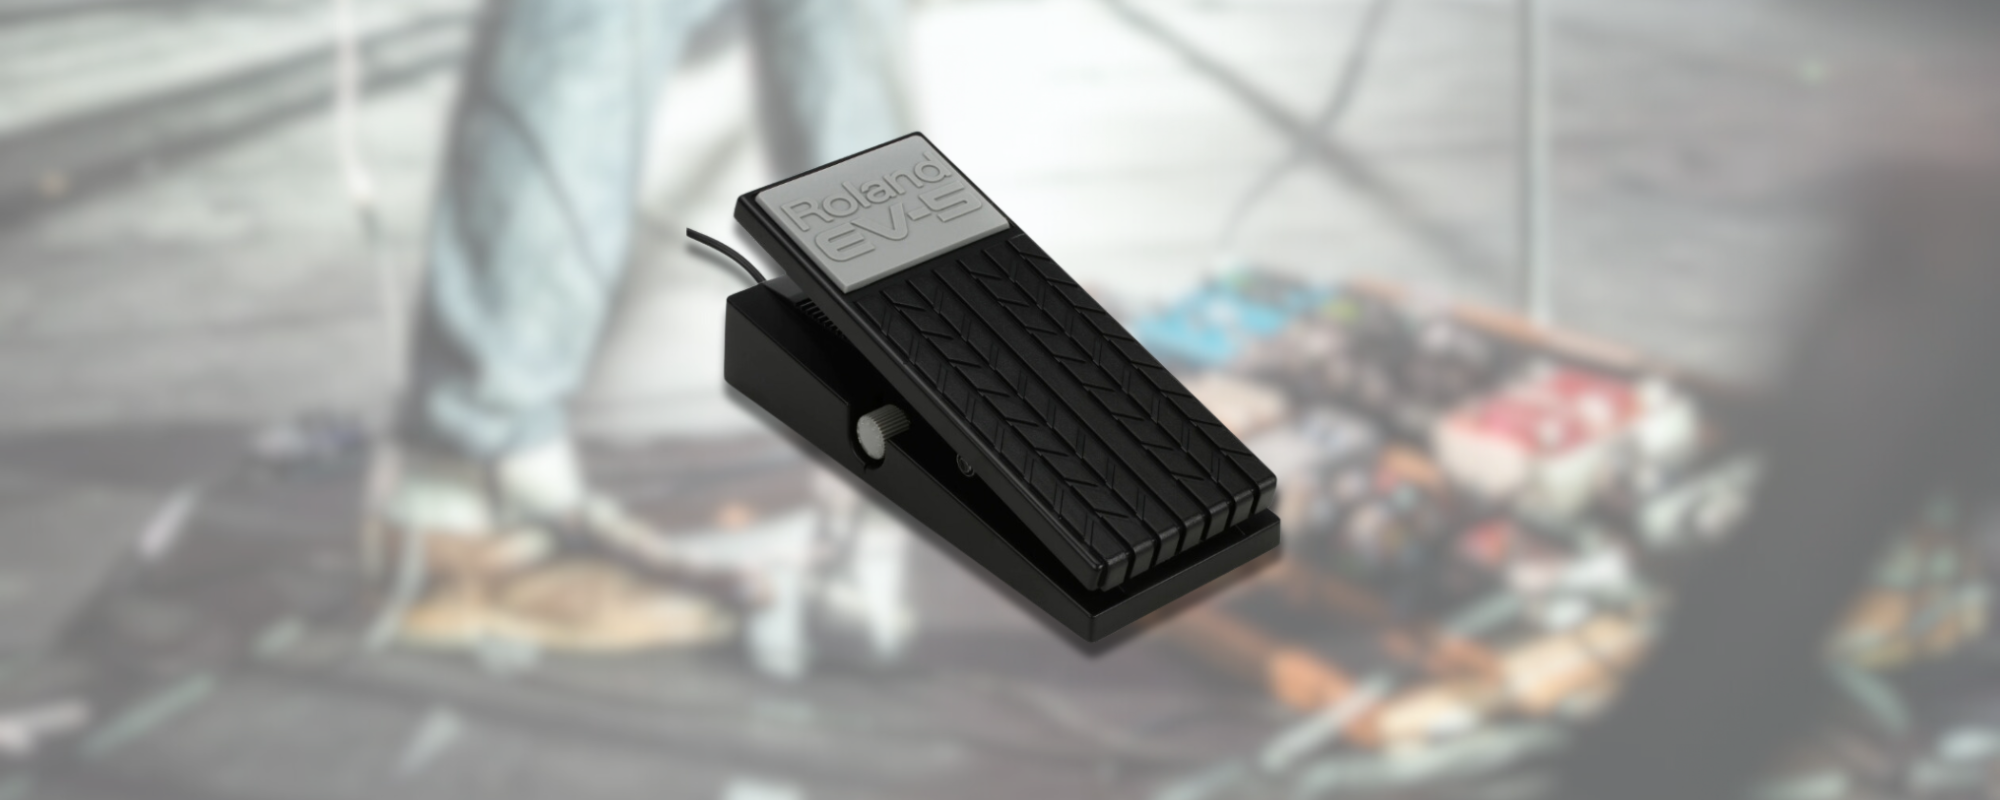 Roland EV-5 Review: An Affordable, Lightweight Expression Pedal